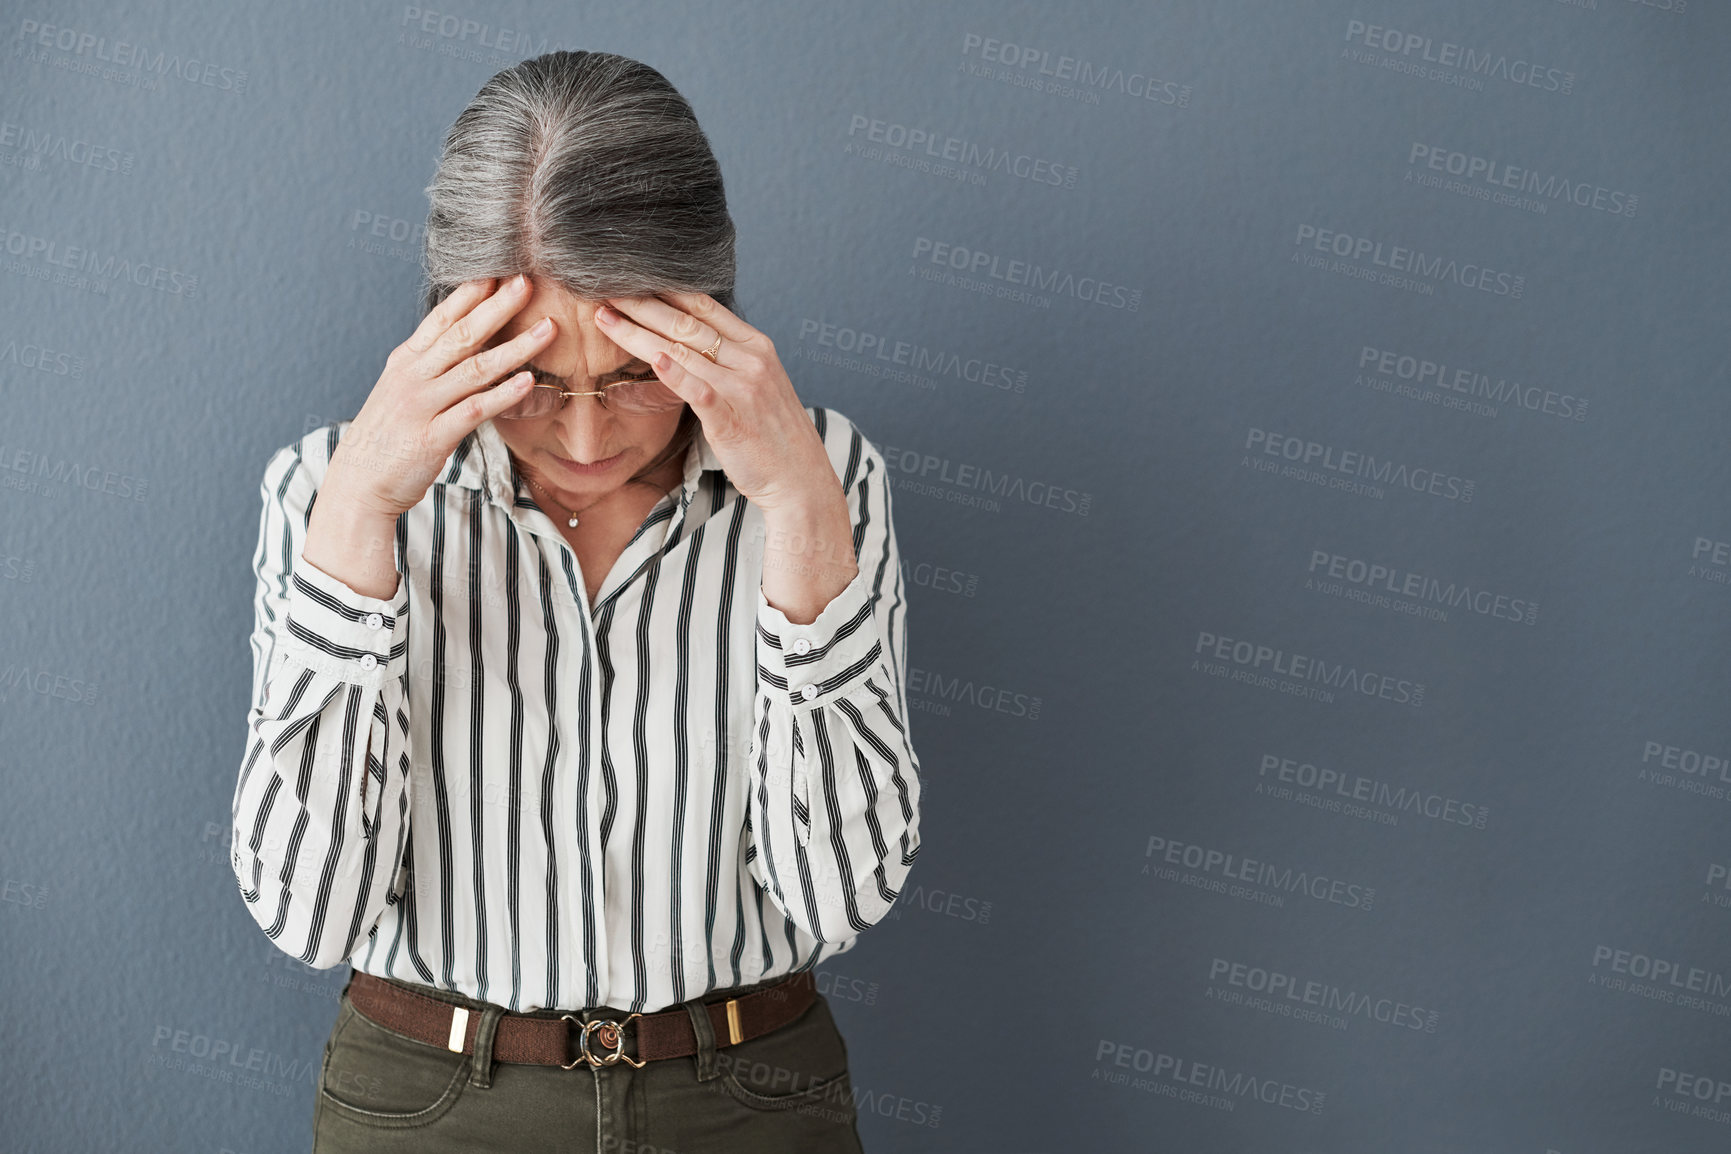 Buy stock photo Shot of a mature businesswoman holding her head suffering an intense headache against a black background